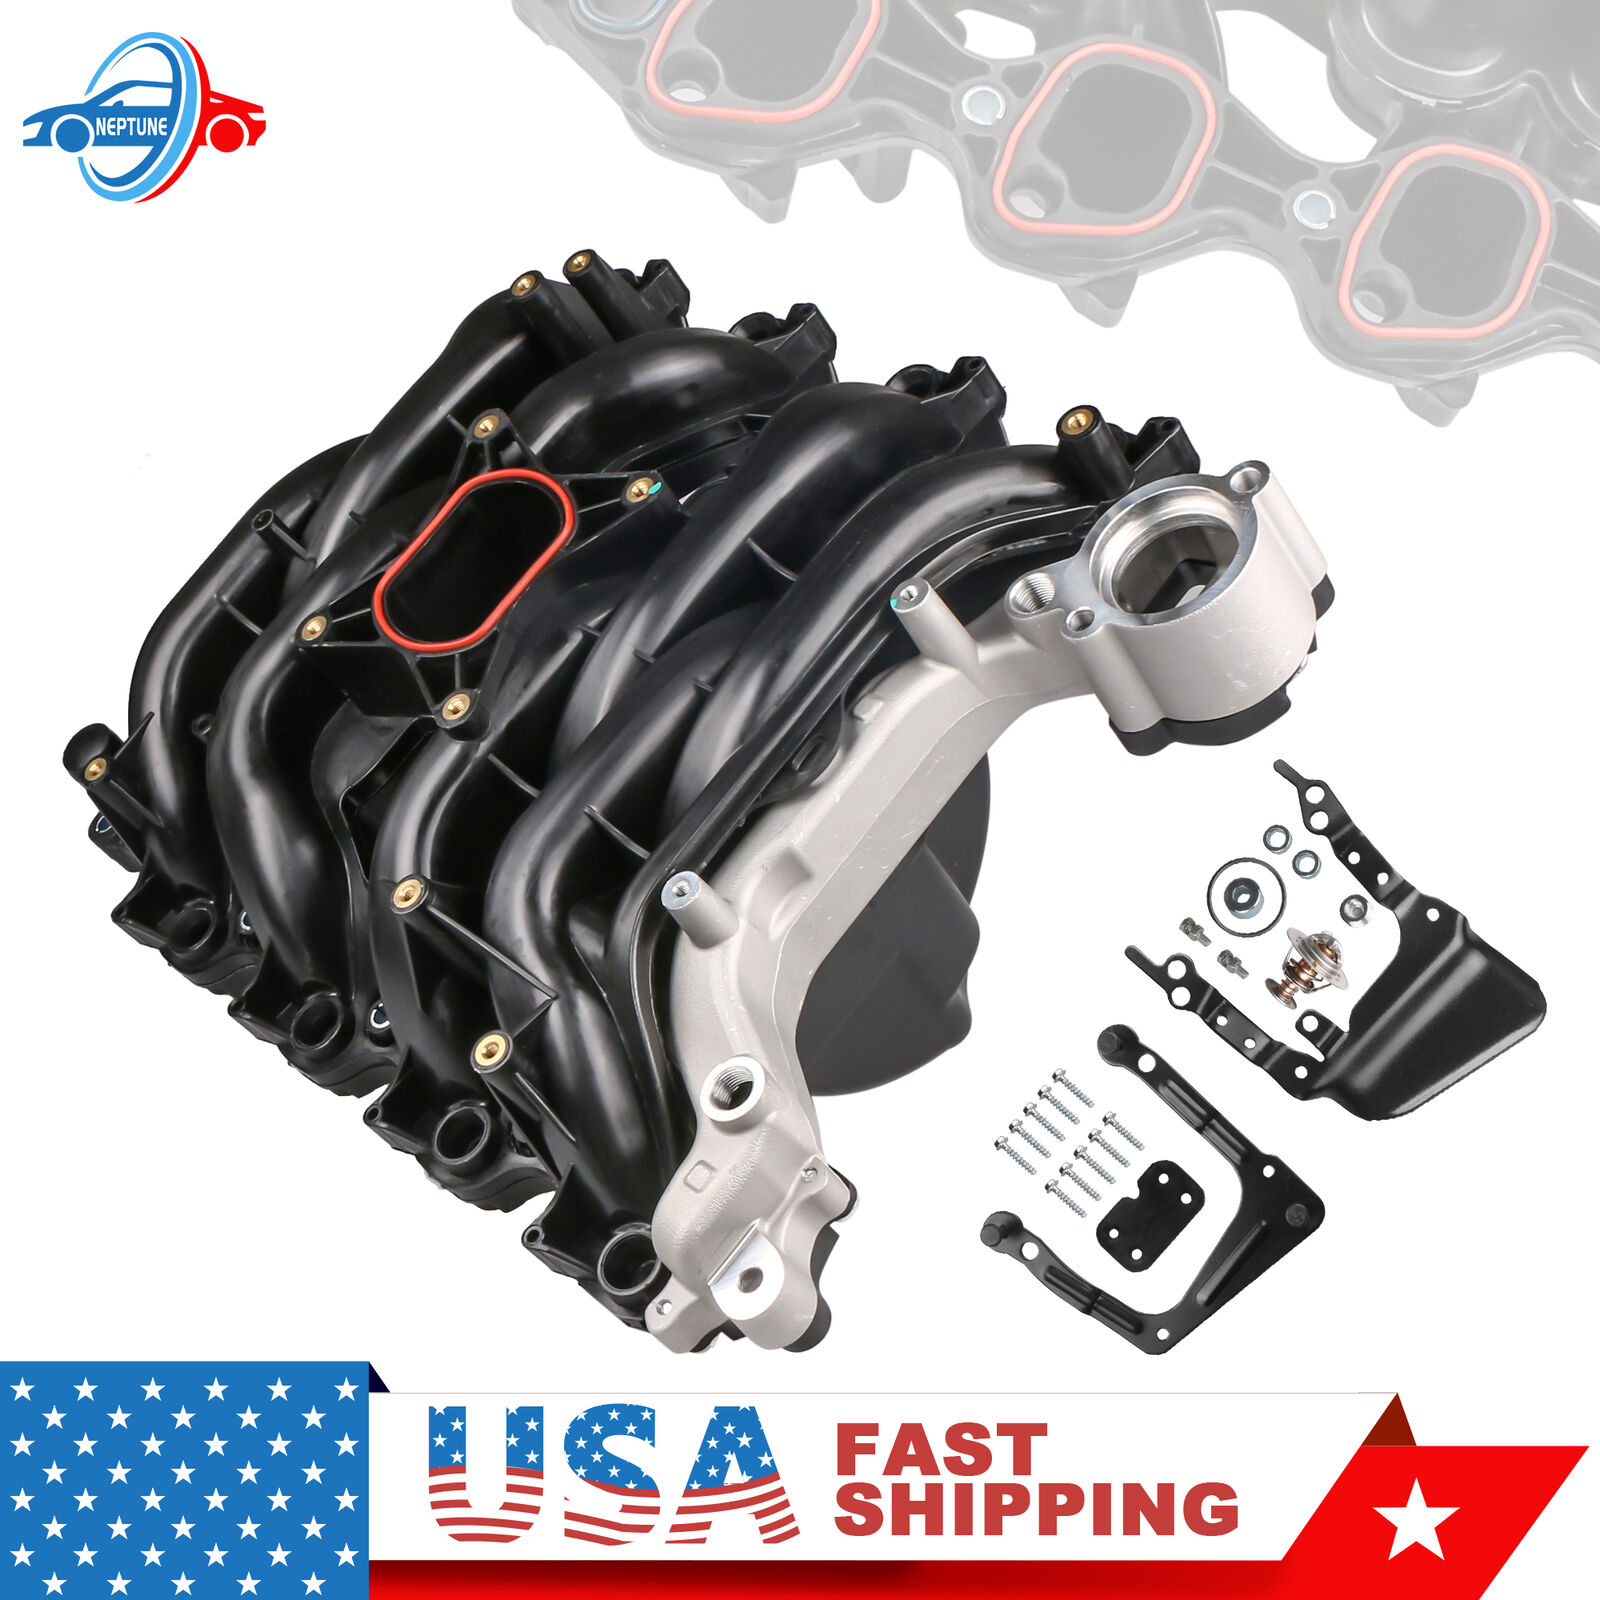 Intake Manifold for Ford Crown Victoria Mustang Lincoln Town Car V8 4.6L Digit W